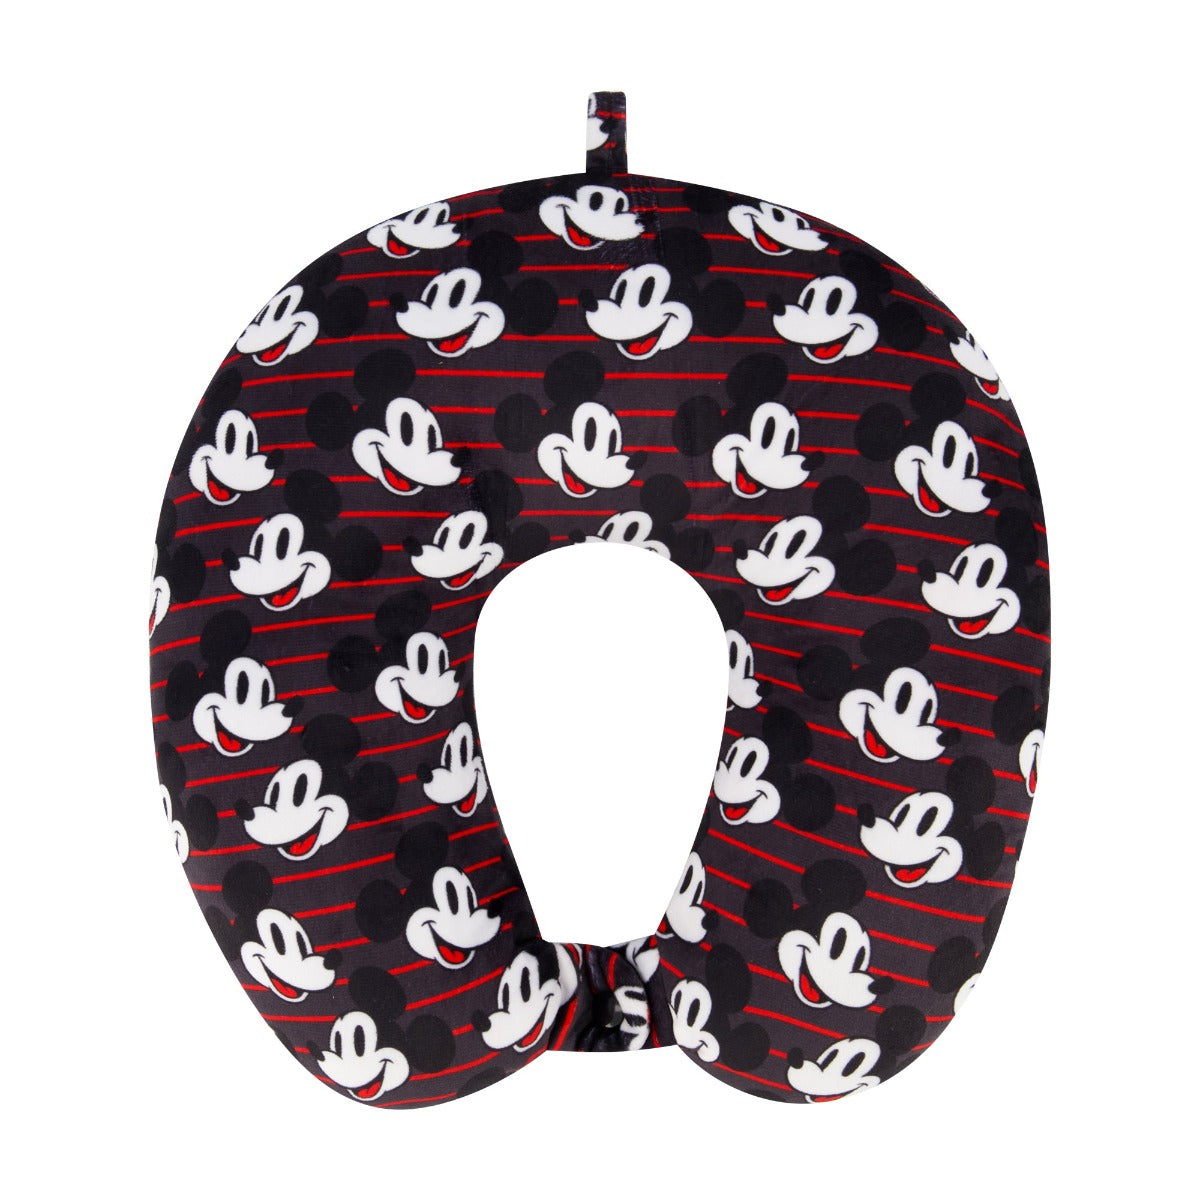 Disney mickey mouse neck pillow red black white - best wrap travel pillow for kids and adults